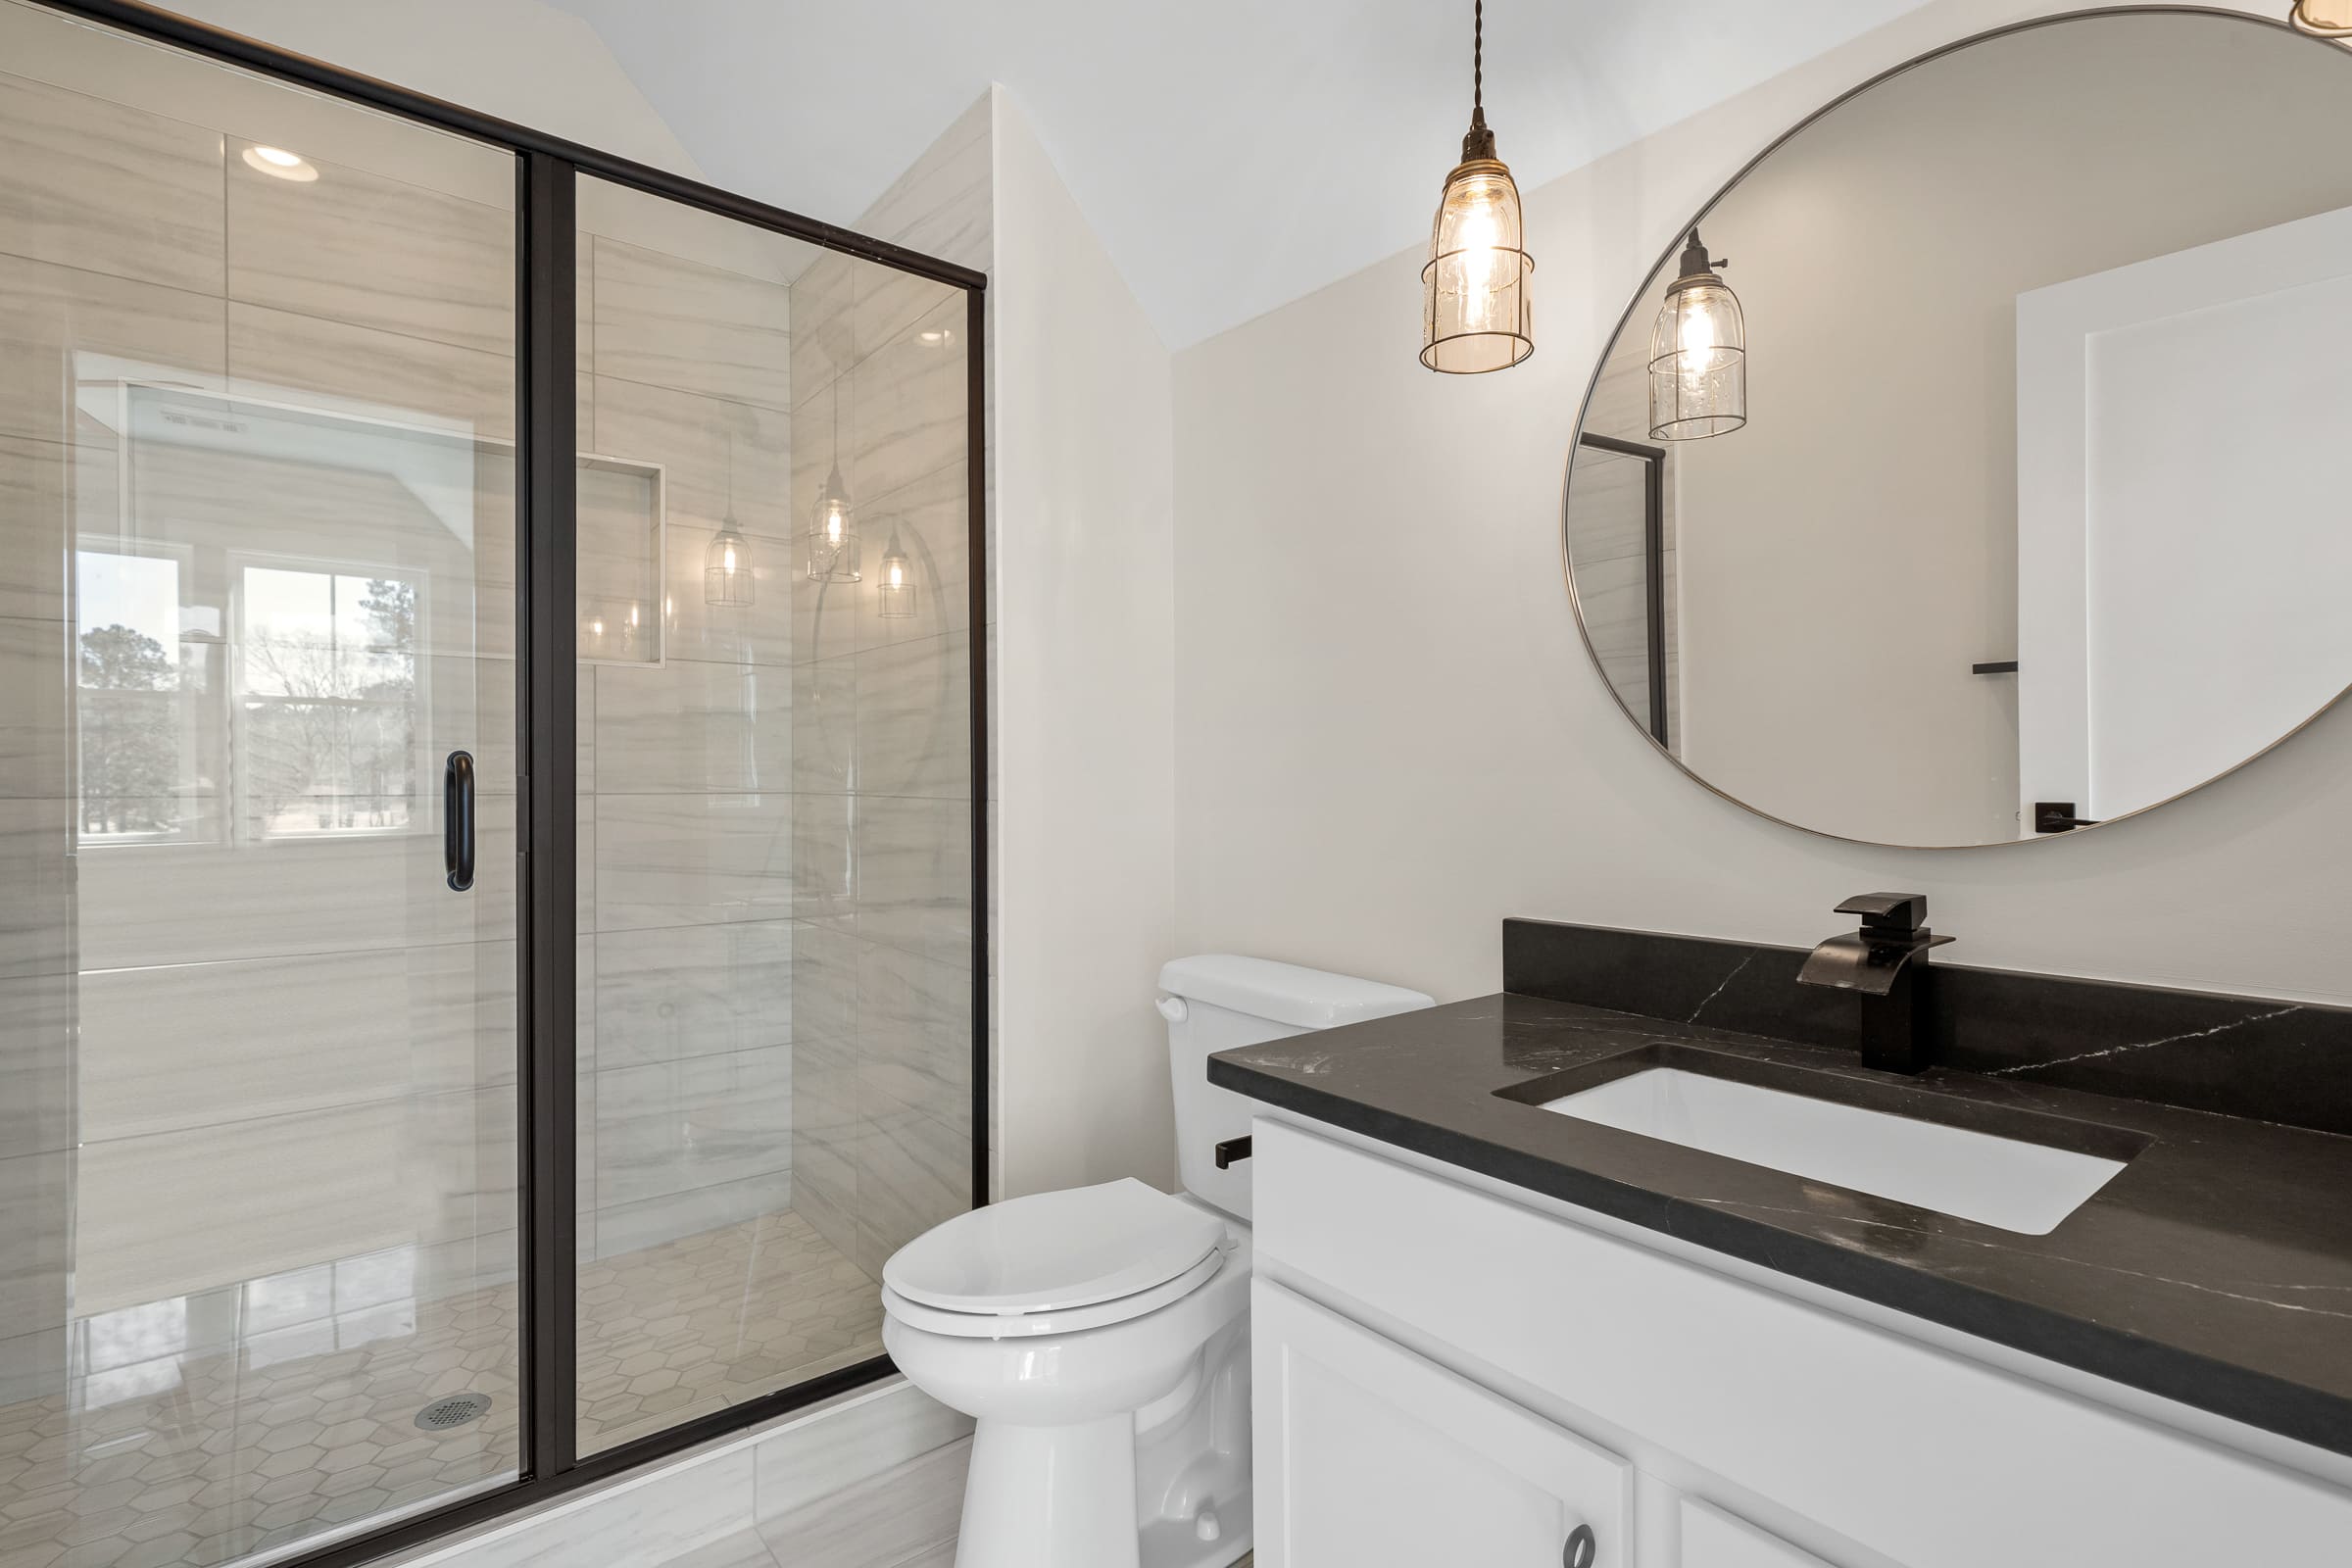 Guest Bathroom with Large Circle Mirror Above Dark Stone Counter Top and White Cabinetry |PAXISgroup